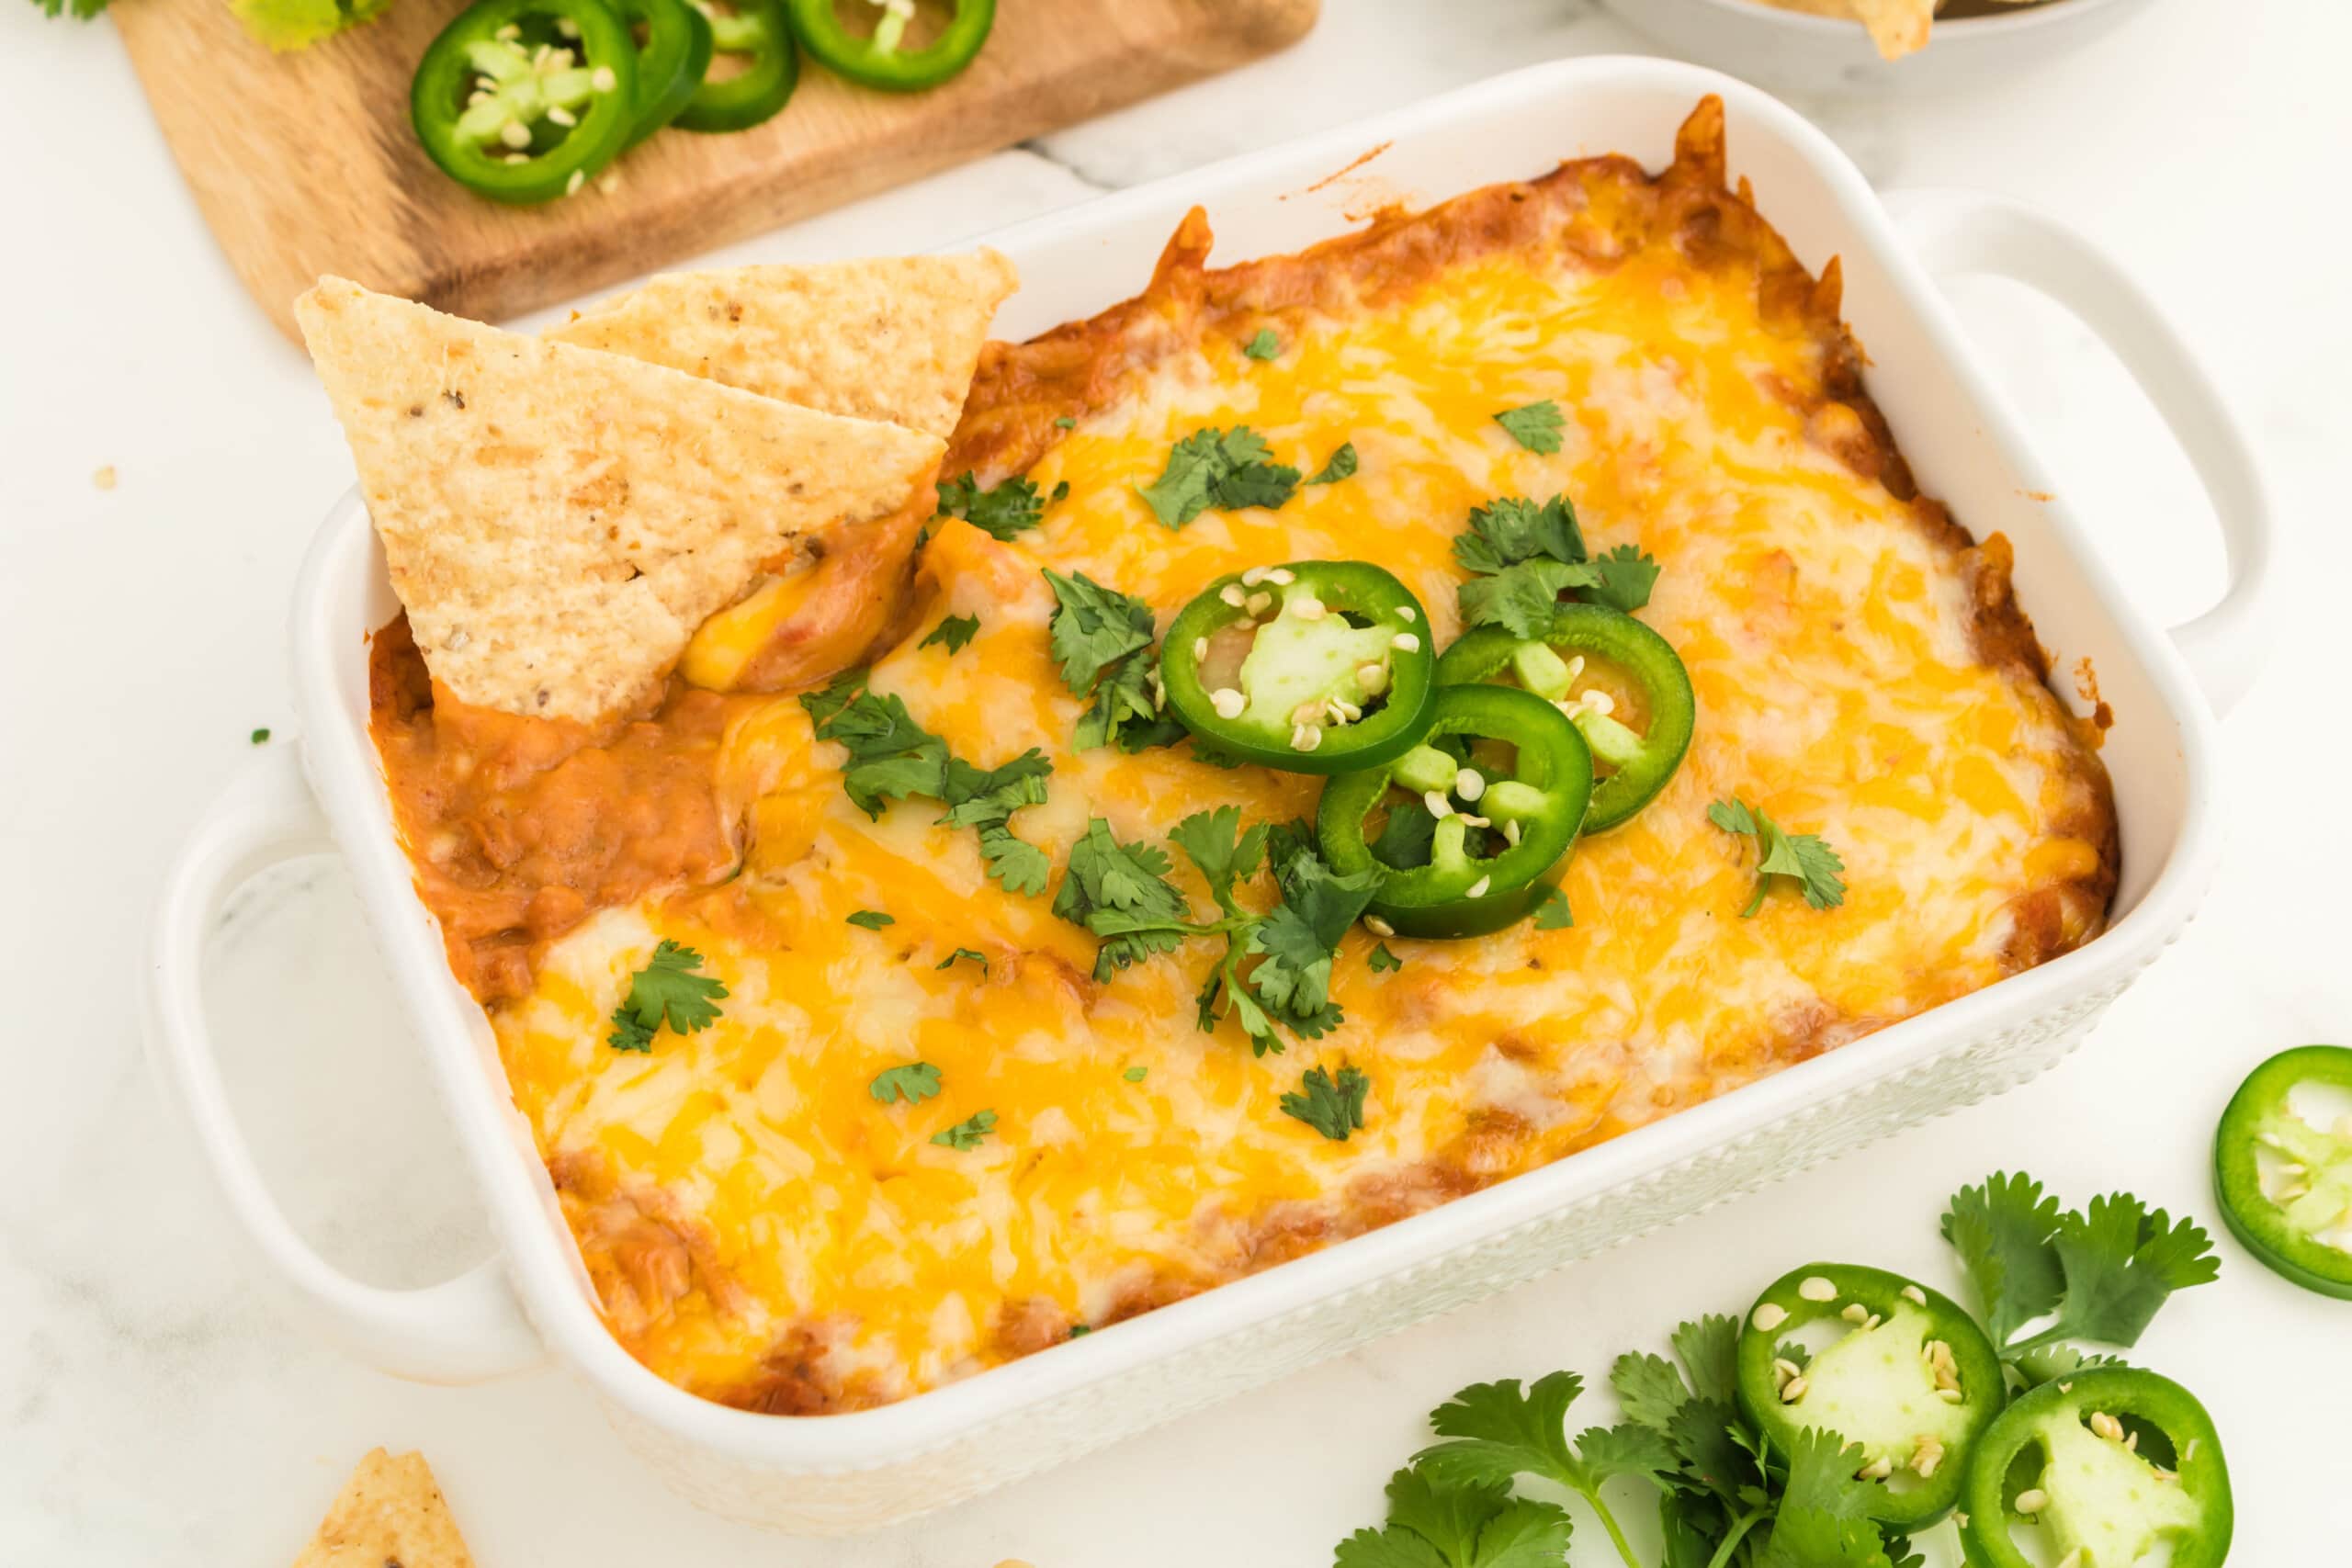 Bean Dip topped with cilantro and jalapenos.